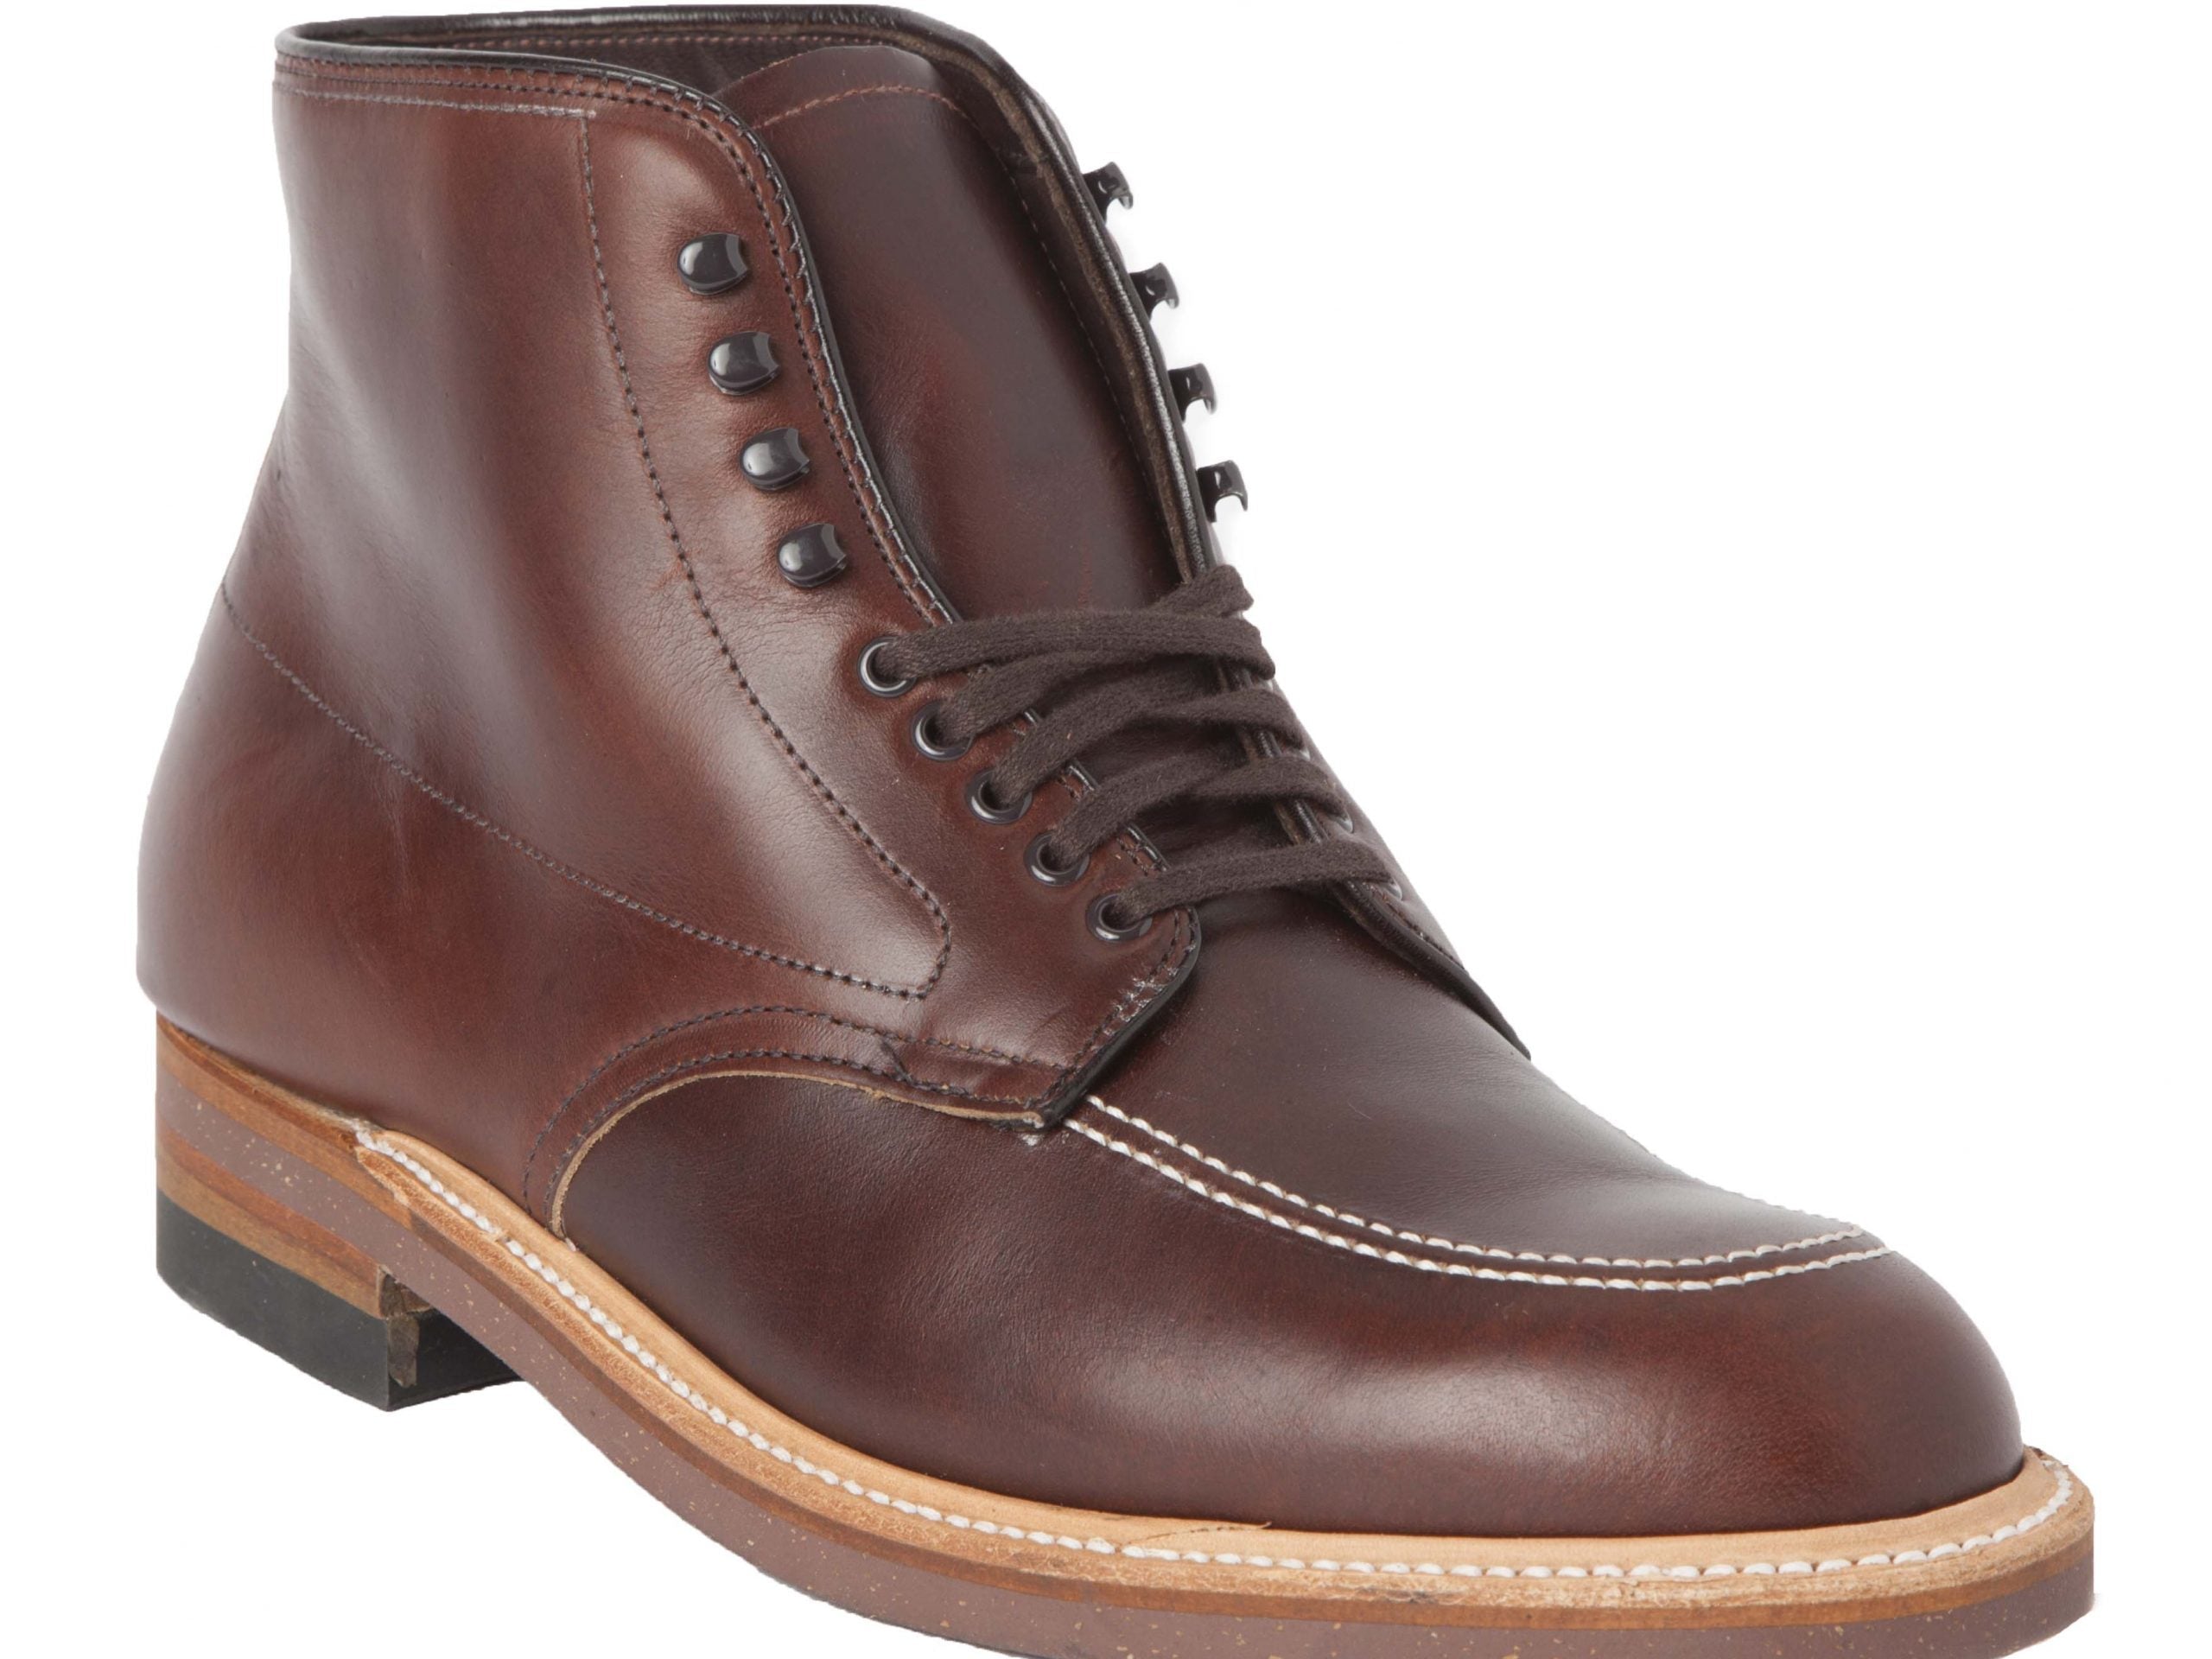 Alden - Indy Boot 403 Brown Aniline Leather - City Workshop Men's Supply Co.